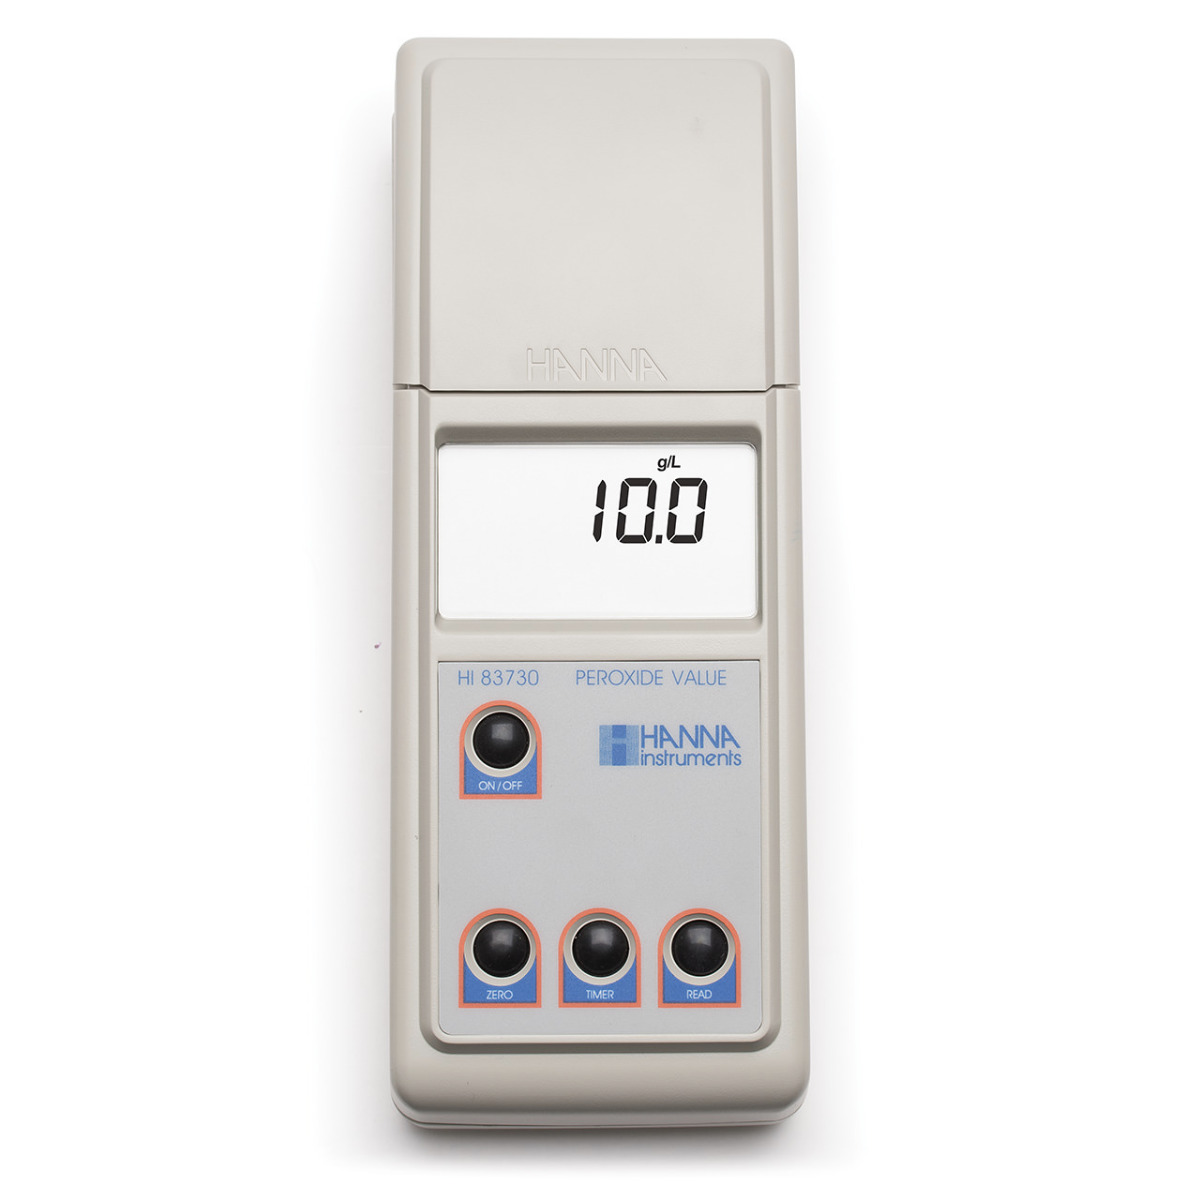 HI83730 Portable Photometer for Determination of Peroxide Value in Oils 